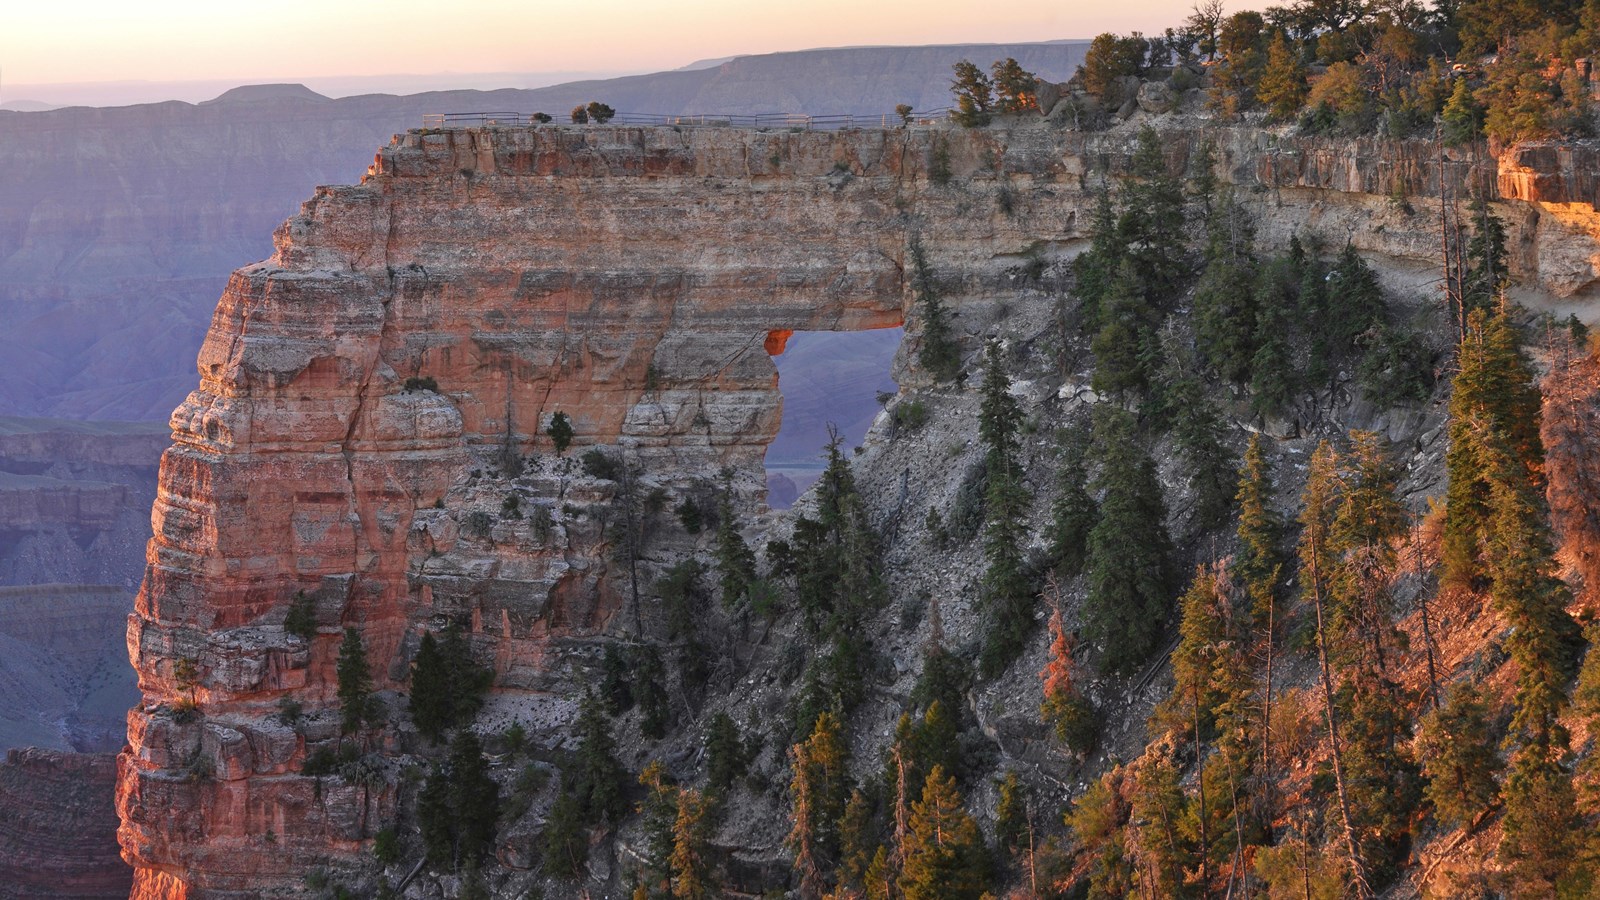 Pink rays of sun illuminate the side of a large, cream-colored stone arch on the side of a cliff.